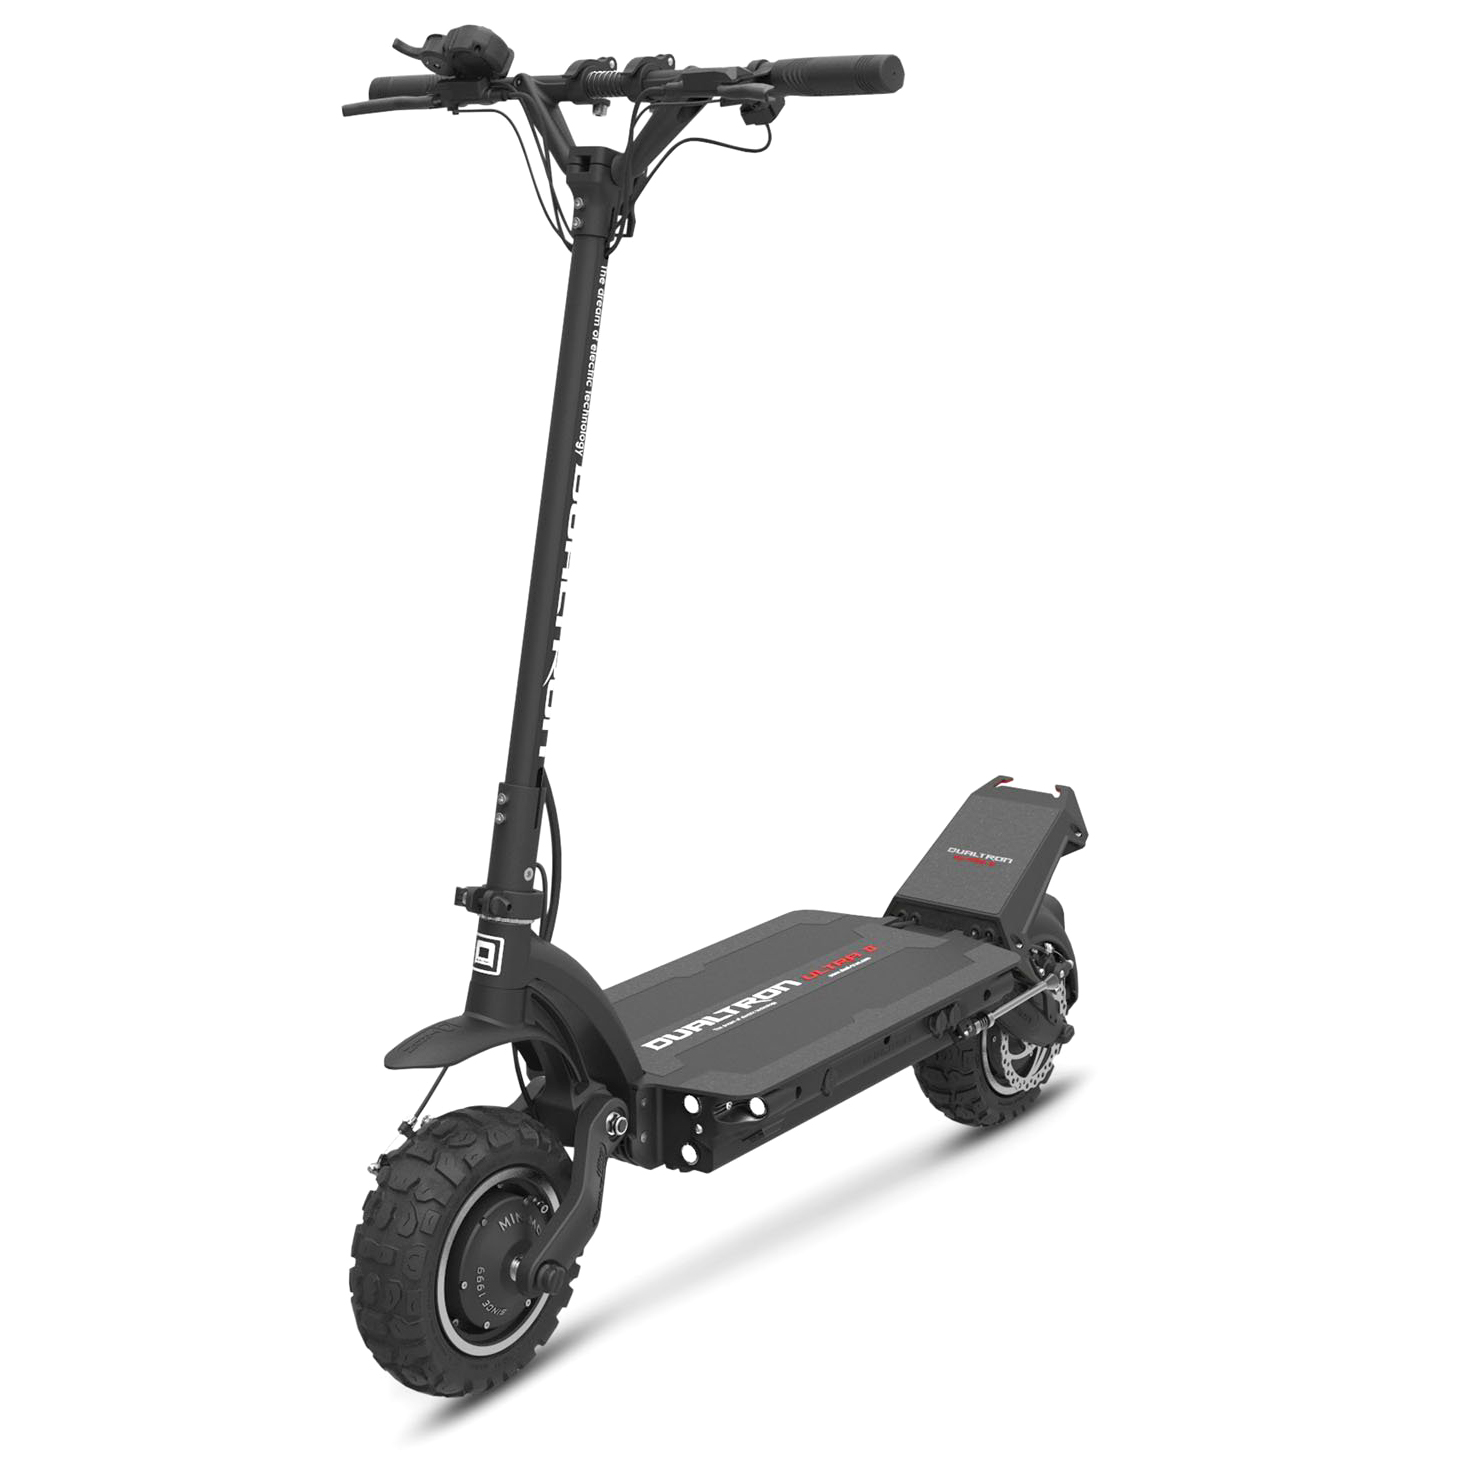 Dualtron Ultra 2 electric scooter standing up